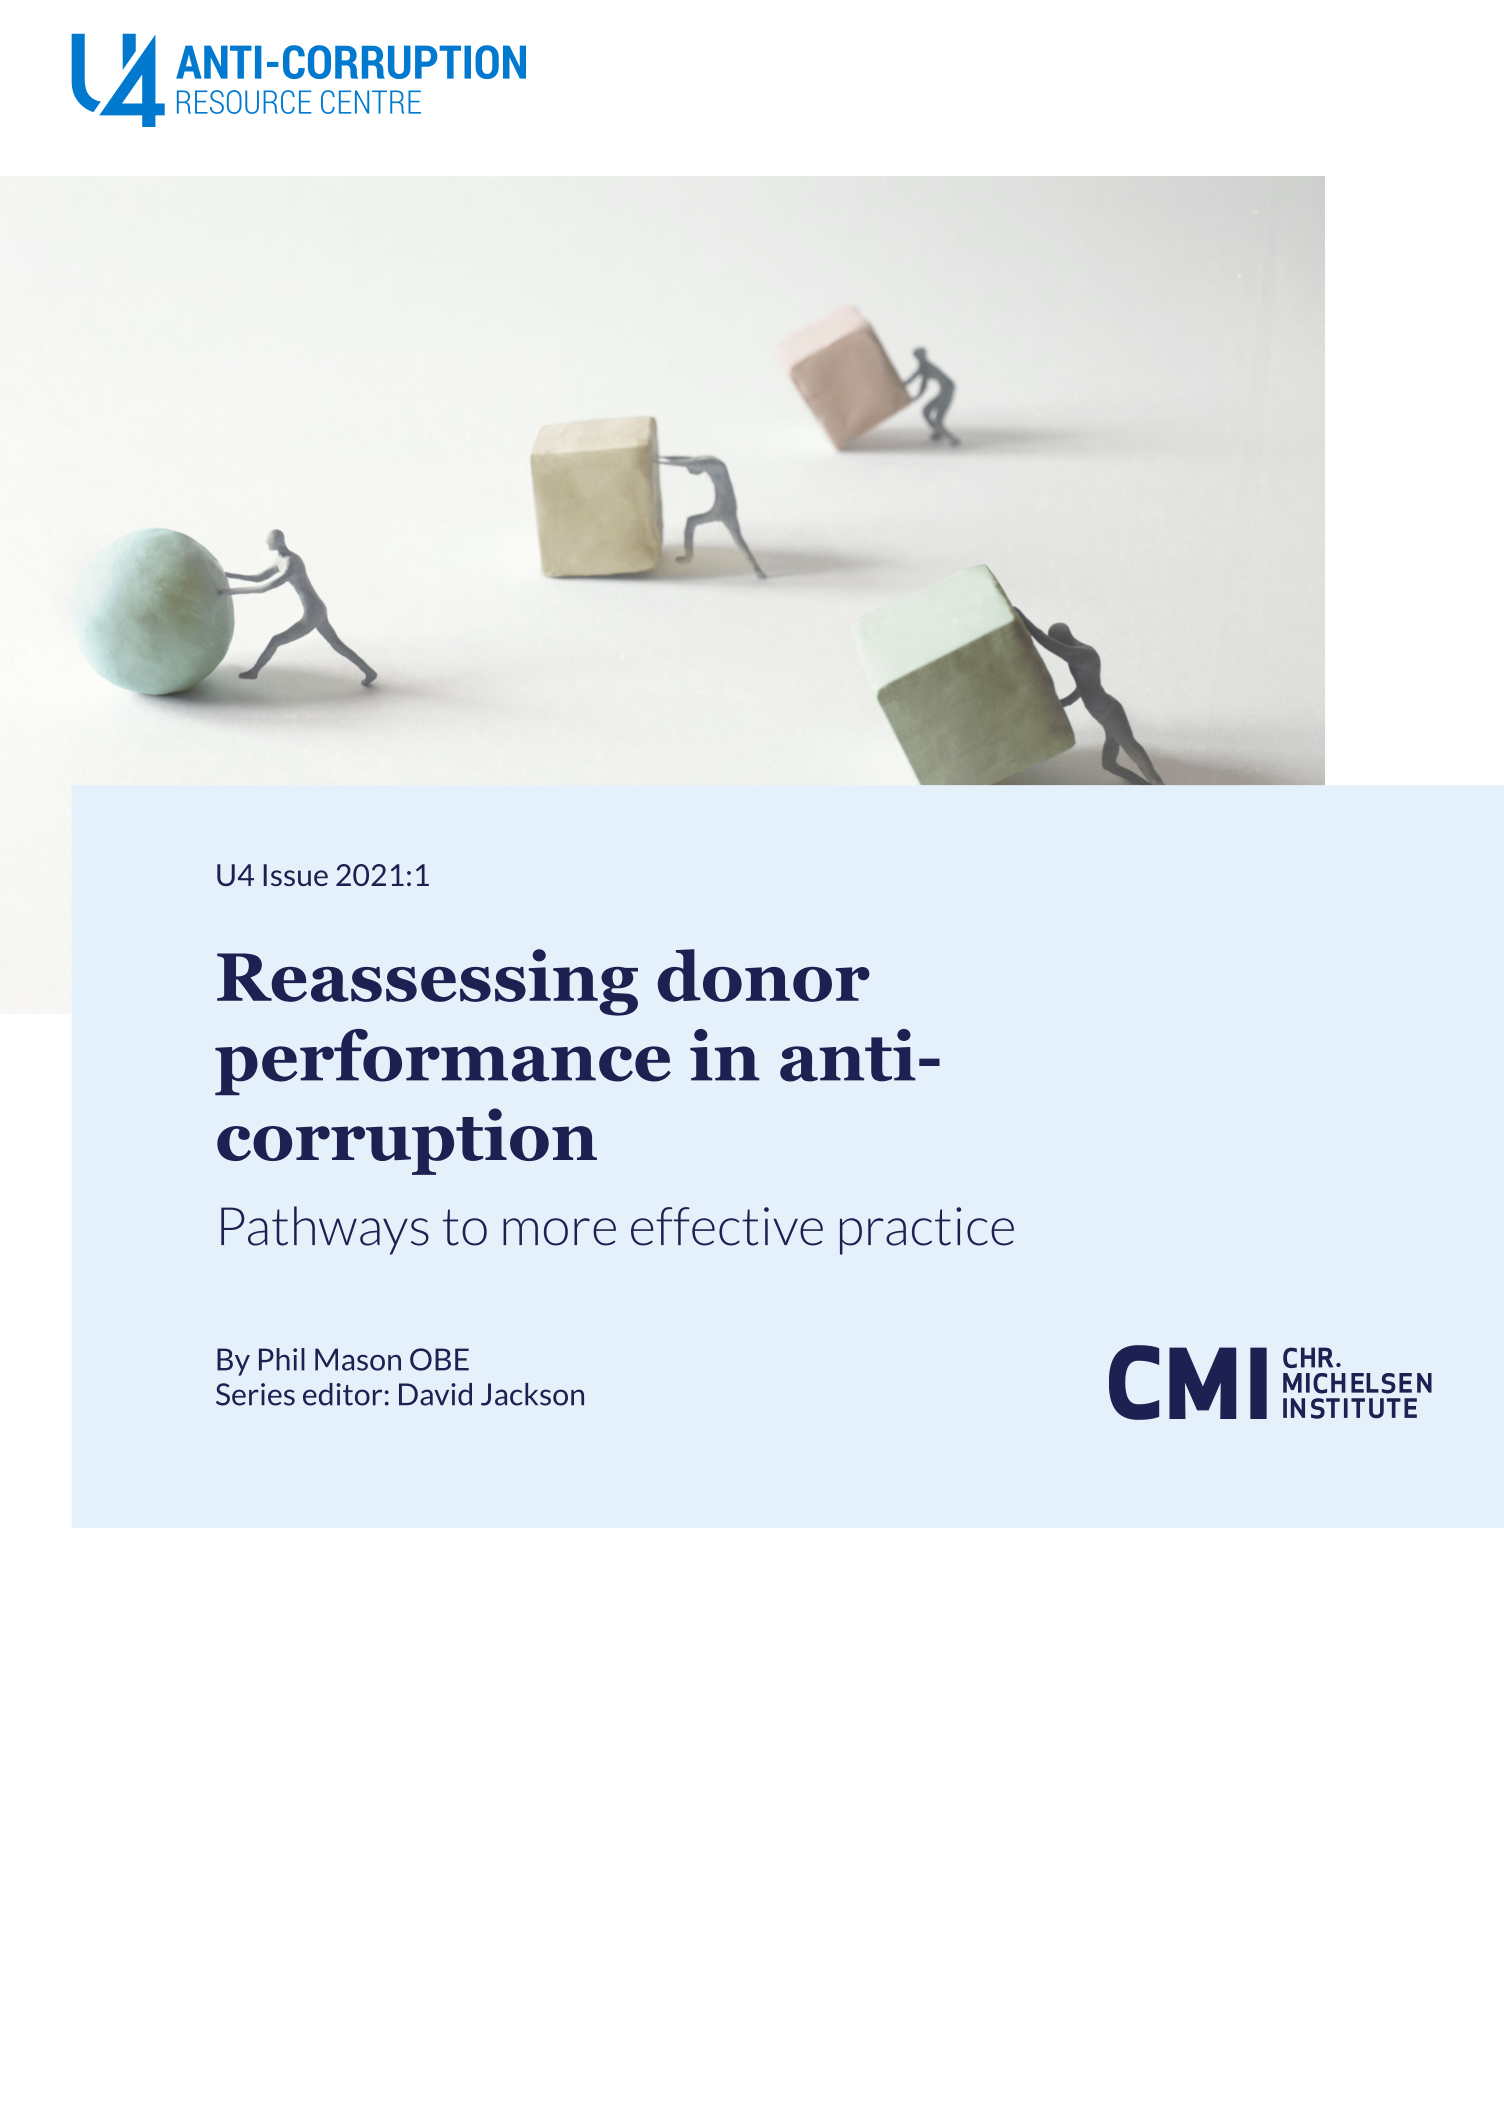 Reassessing donor performance in anti-corruption